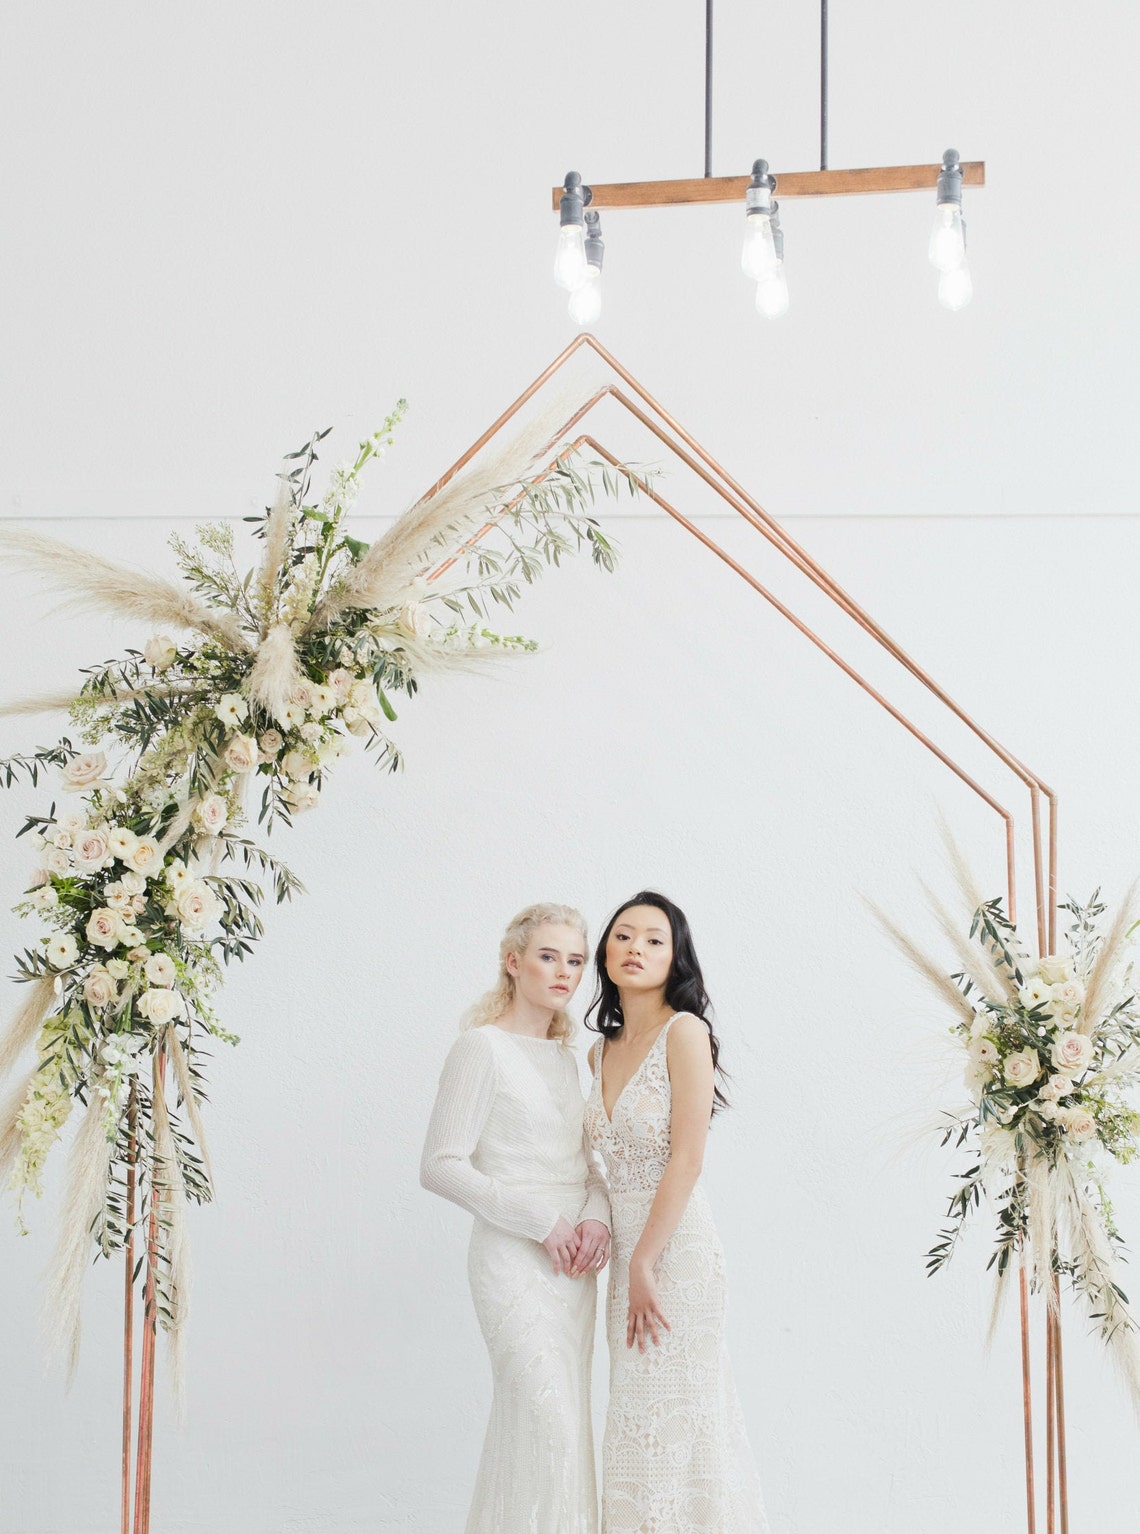 Copper Wedding Arch Rose Gold Flower Stand Geometric Photo image 1